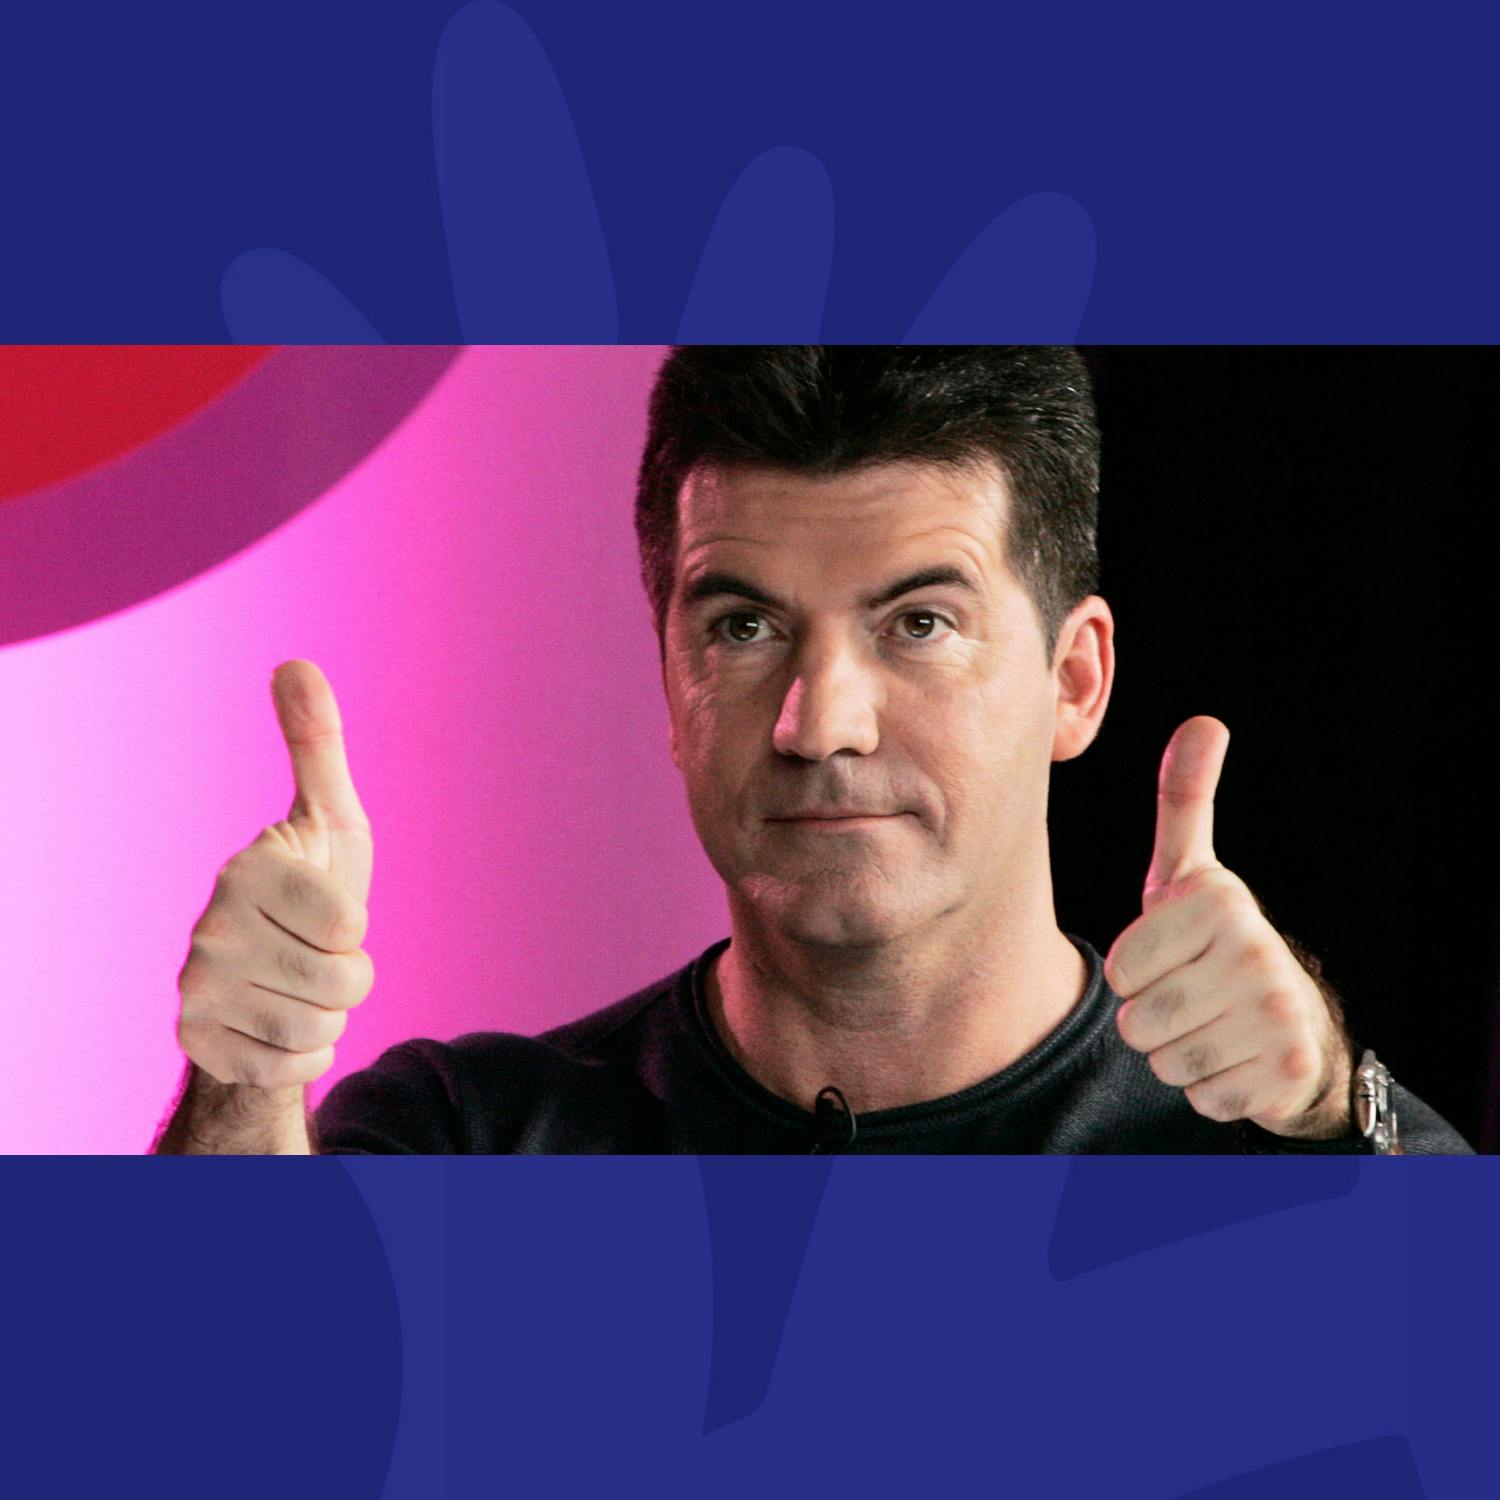 NO WAY?! Simon Cowell Is On The Show!